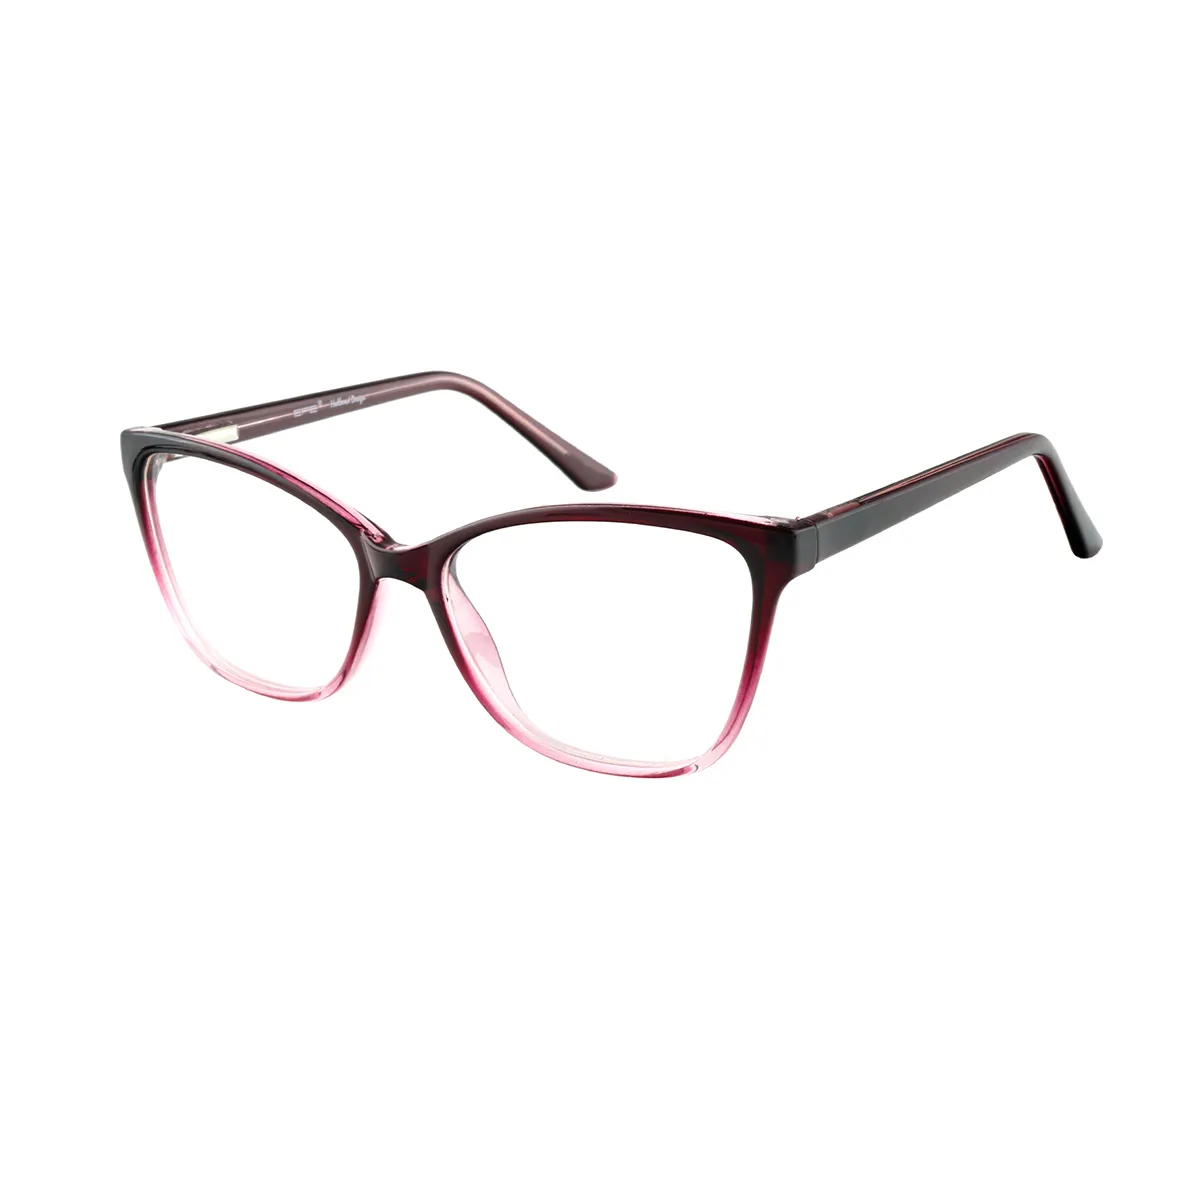 McElroy - Square Transparent Glasses for Women